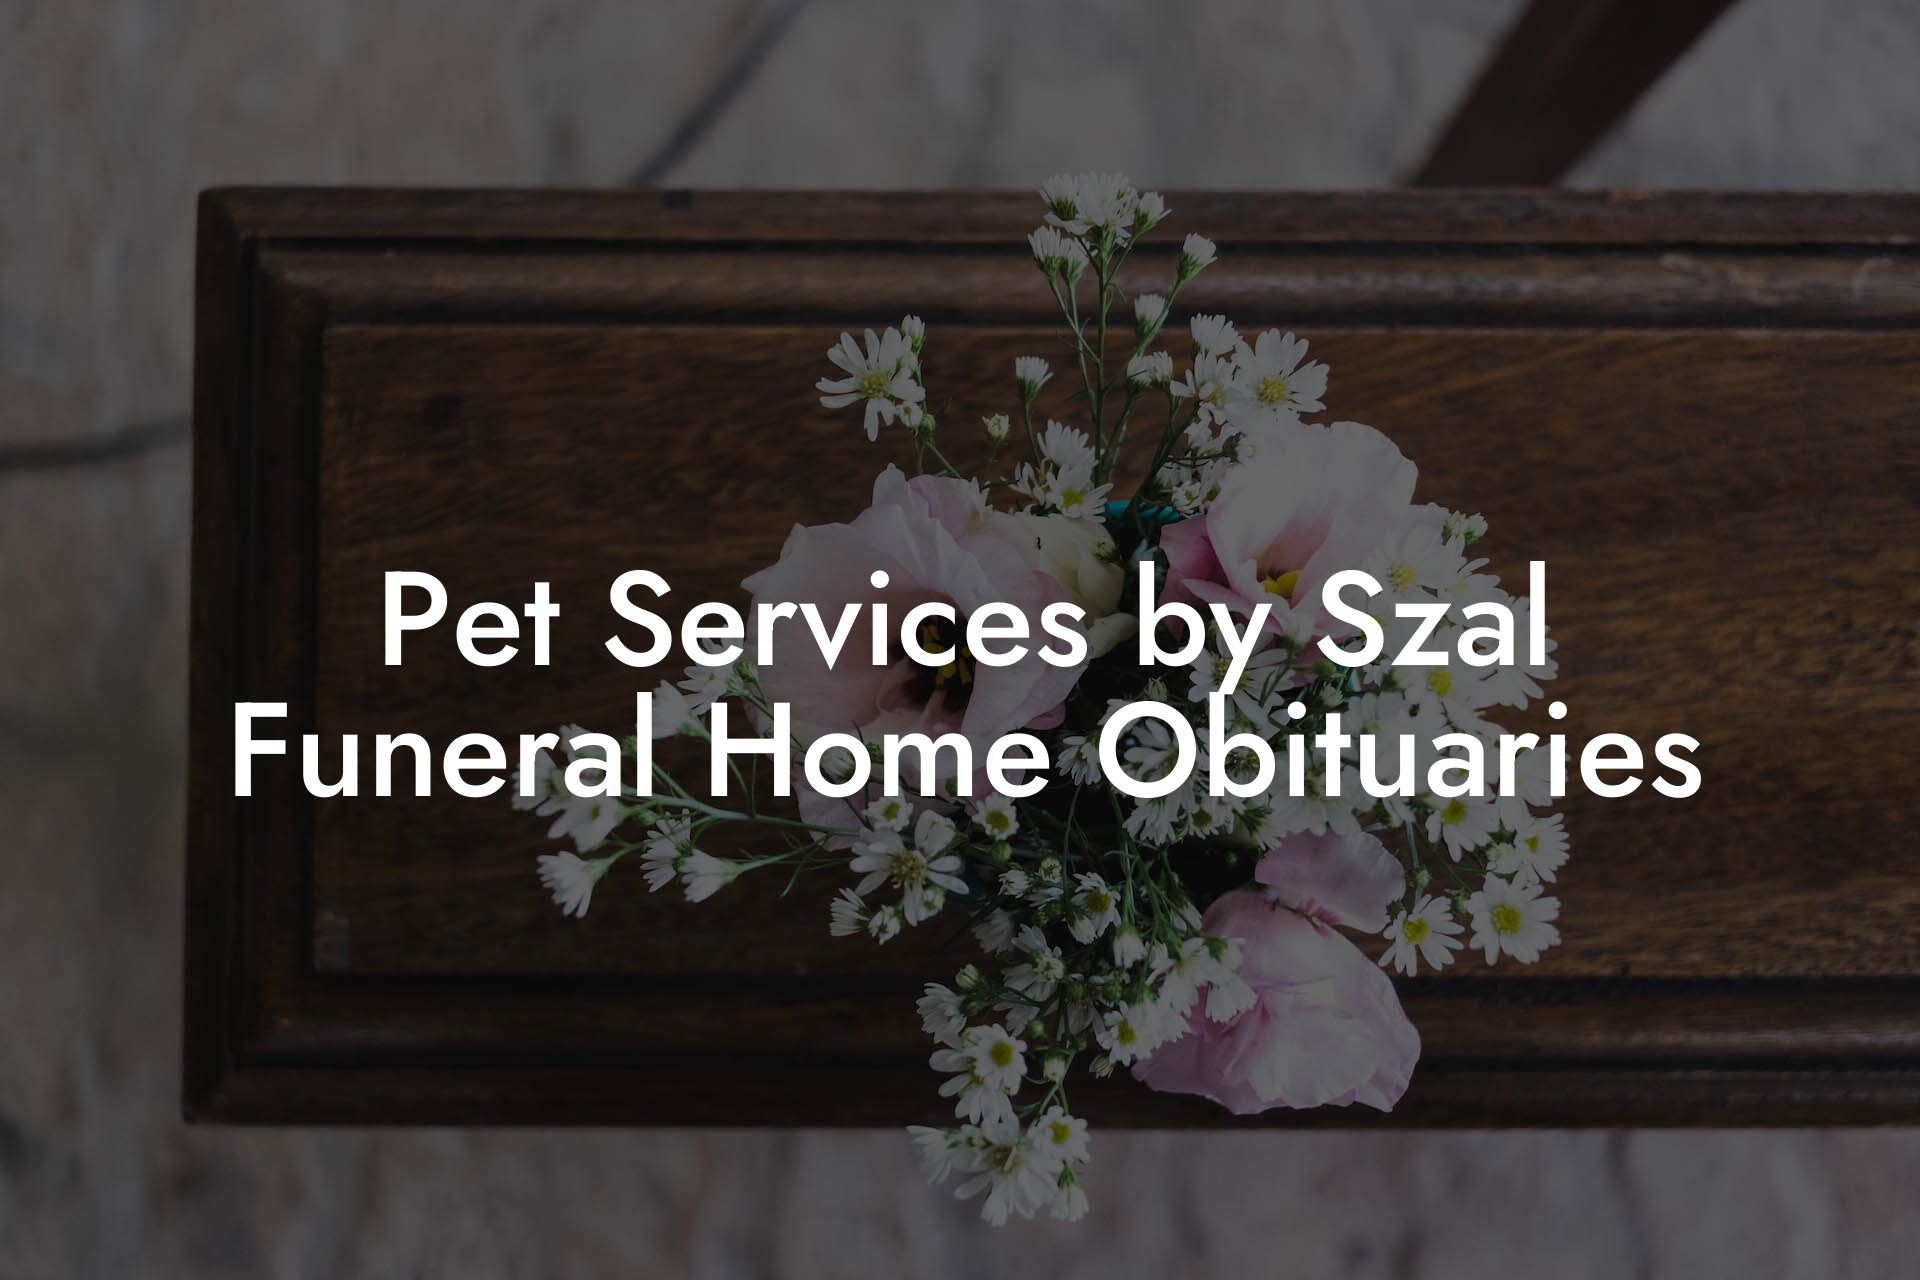 Pet Services by Szal Funeral Home Obituaries